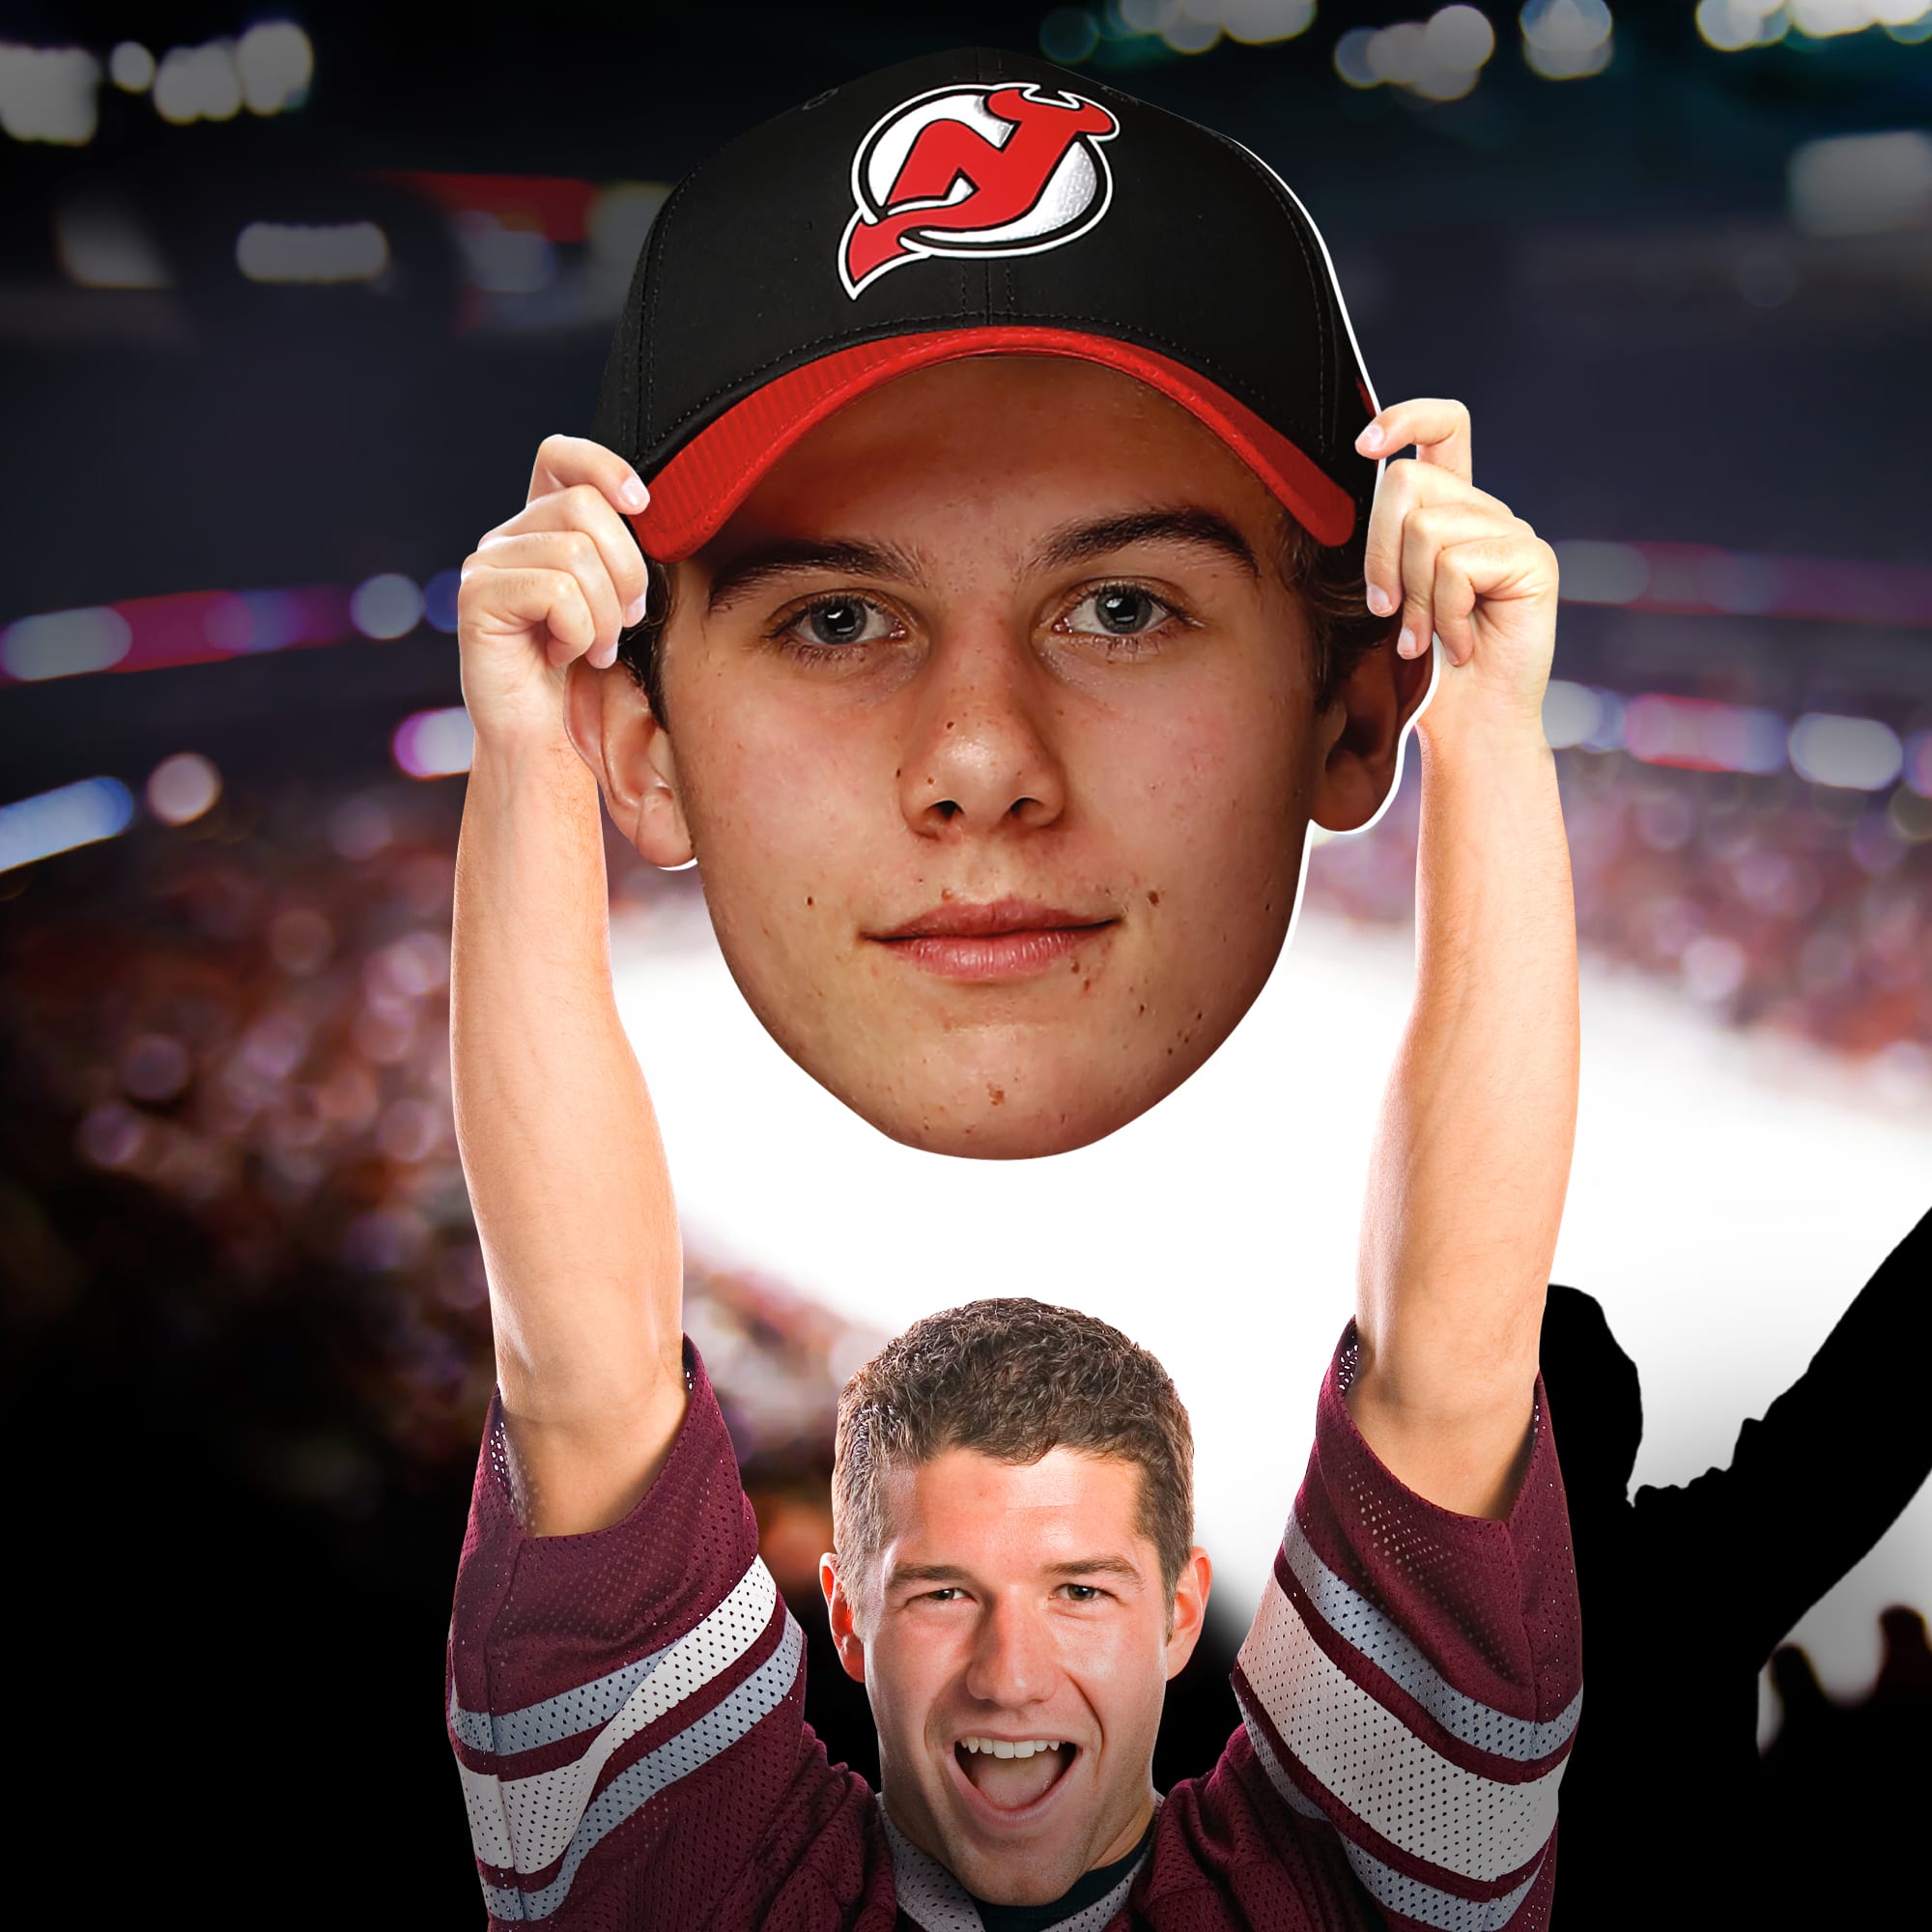 New Jersey Devils: Jack Hughes 2021 Poster - Officially Licensed NHL R –  Fathead